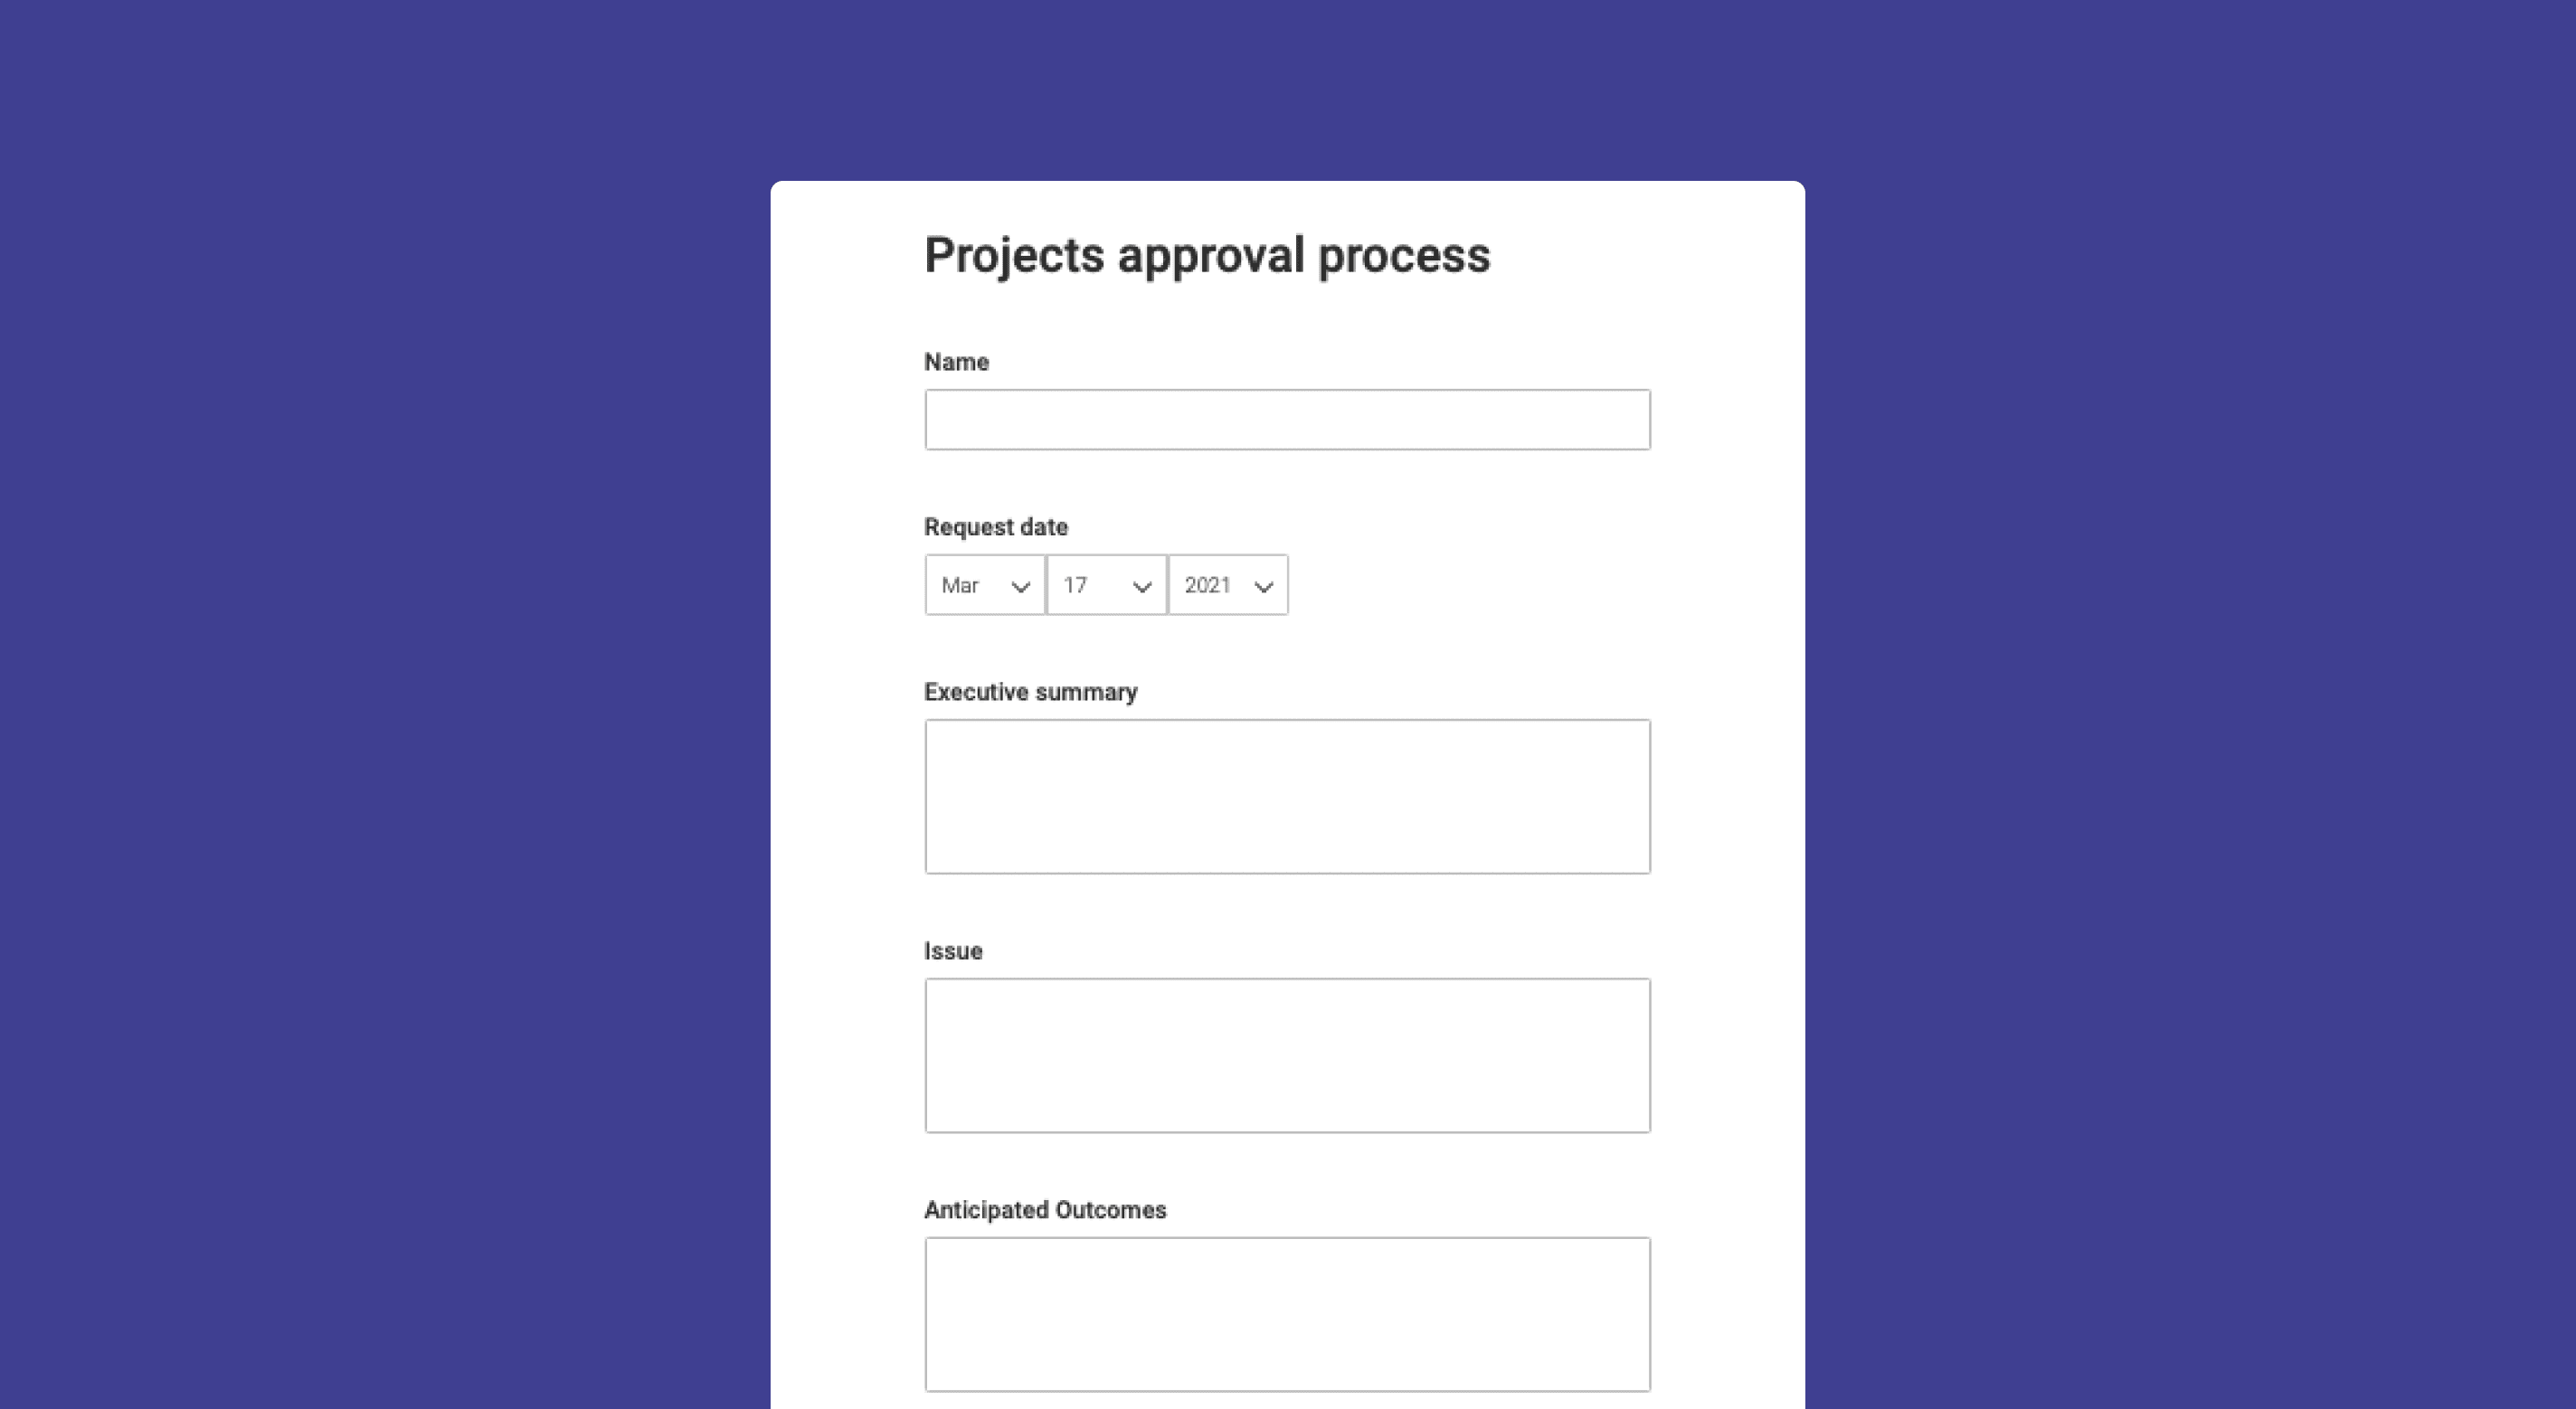 approval form